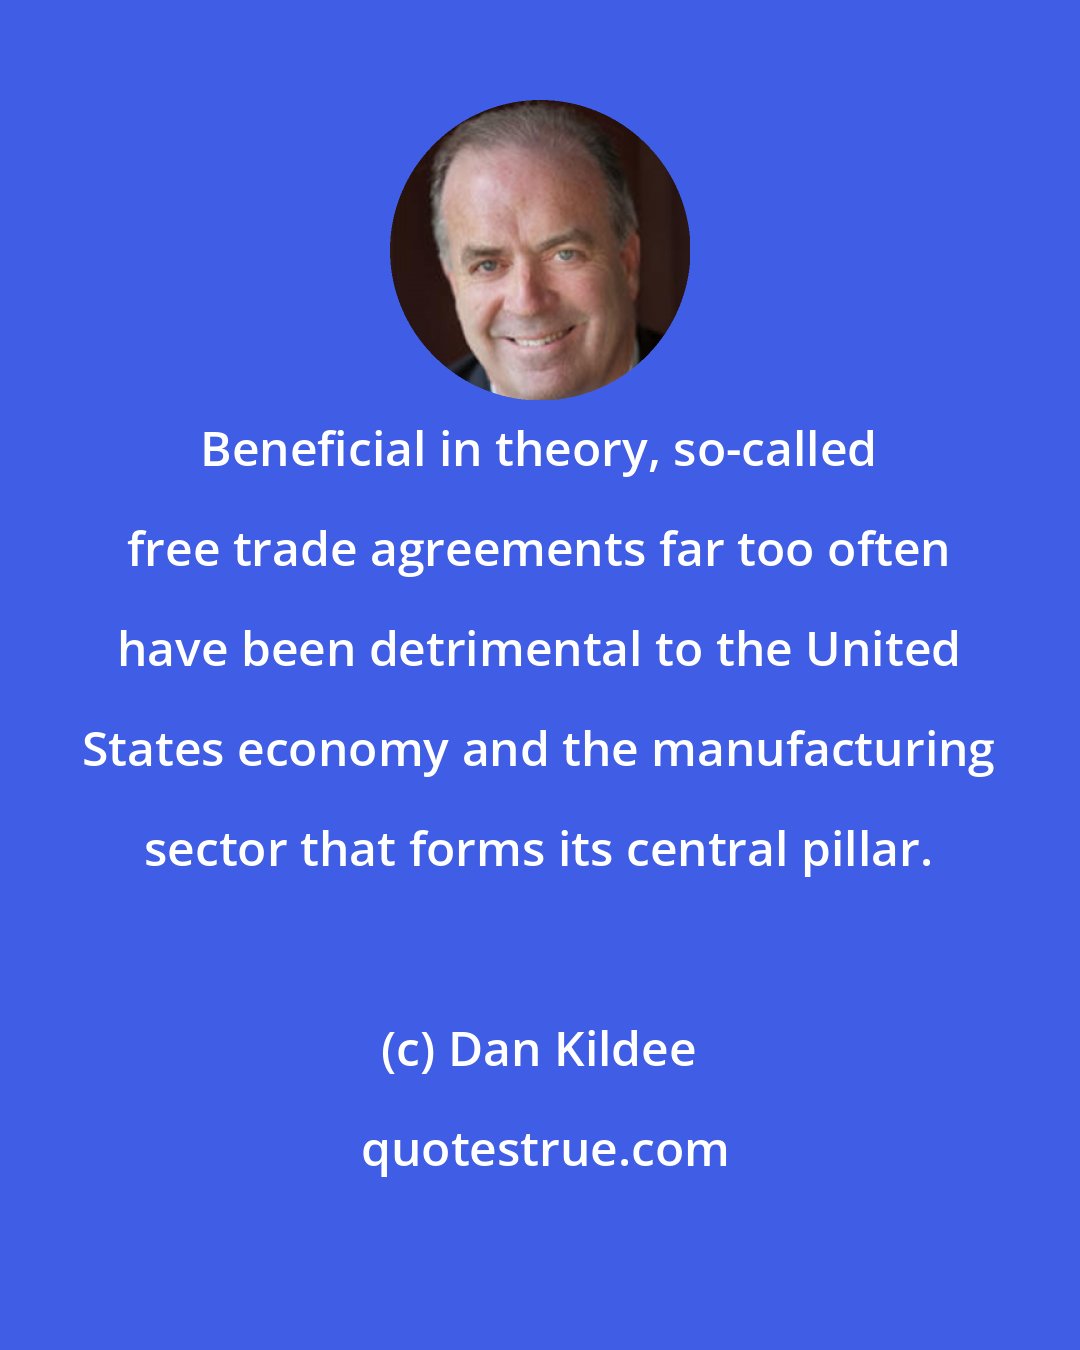 Dan Kildee: Beneficial in theory, so-called free trade agreements far too often have been detrimental to the United States economy and the manufacturing sector that forms its central pillar.